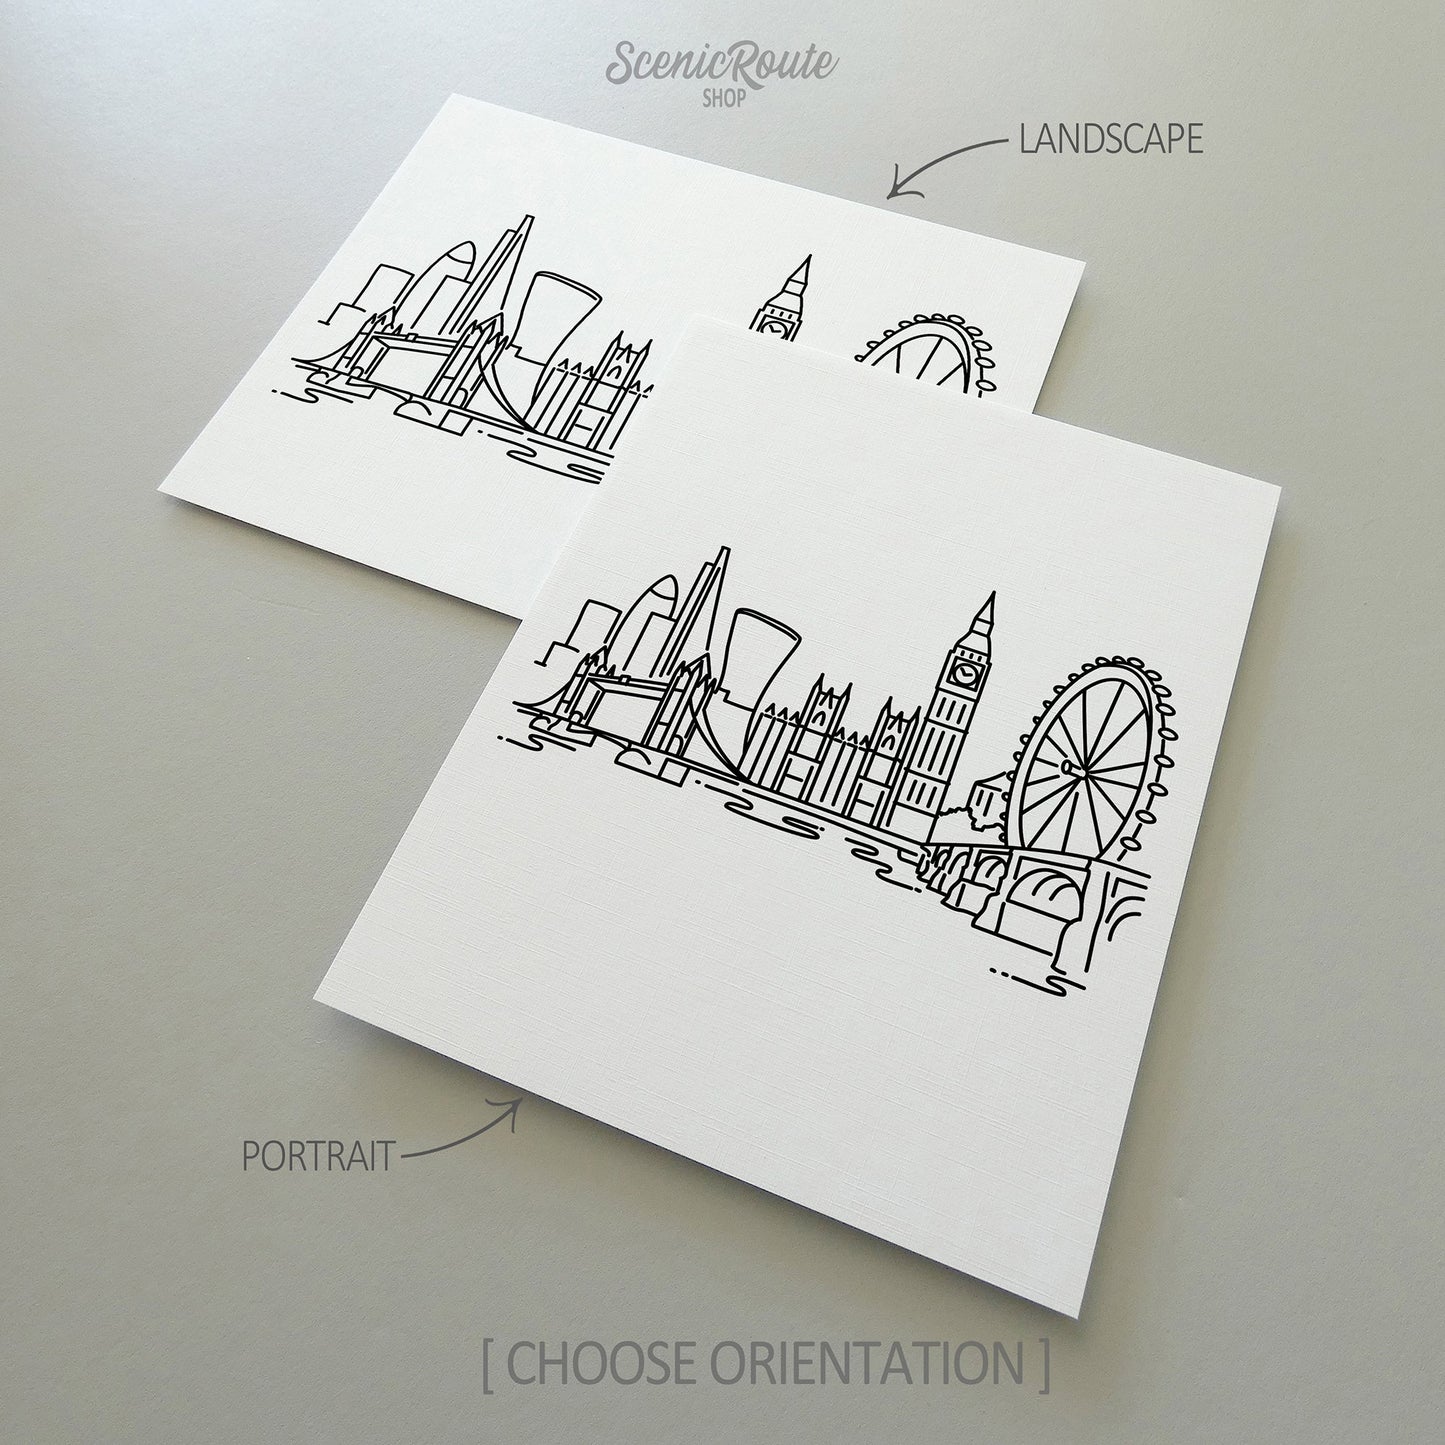 Two line art drawings of the London Skyline on white linen paper with a gray background.  The pieces are shown in portrait and landscape orientation for the available art print options.